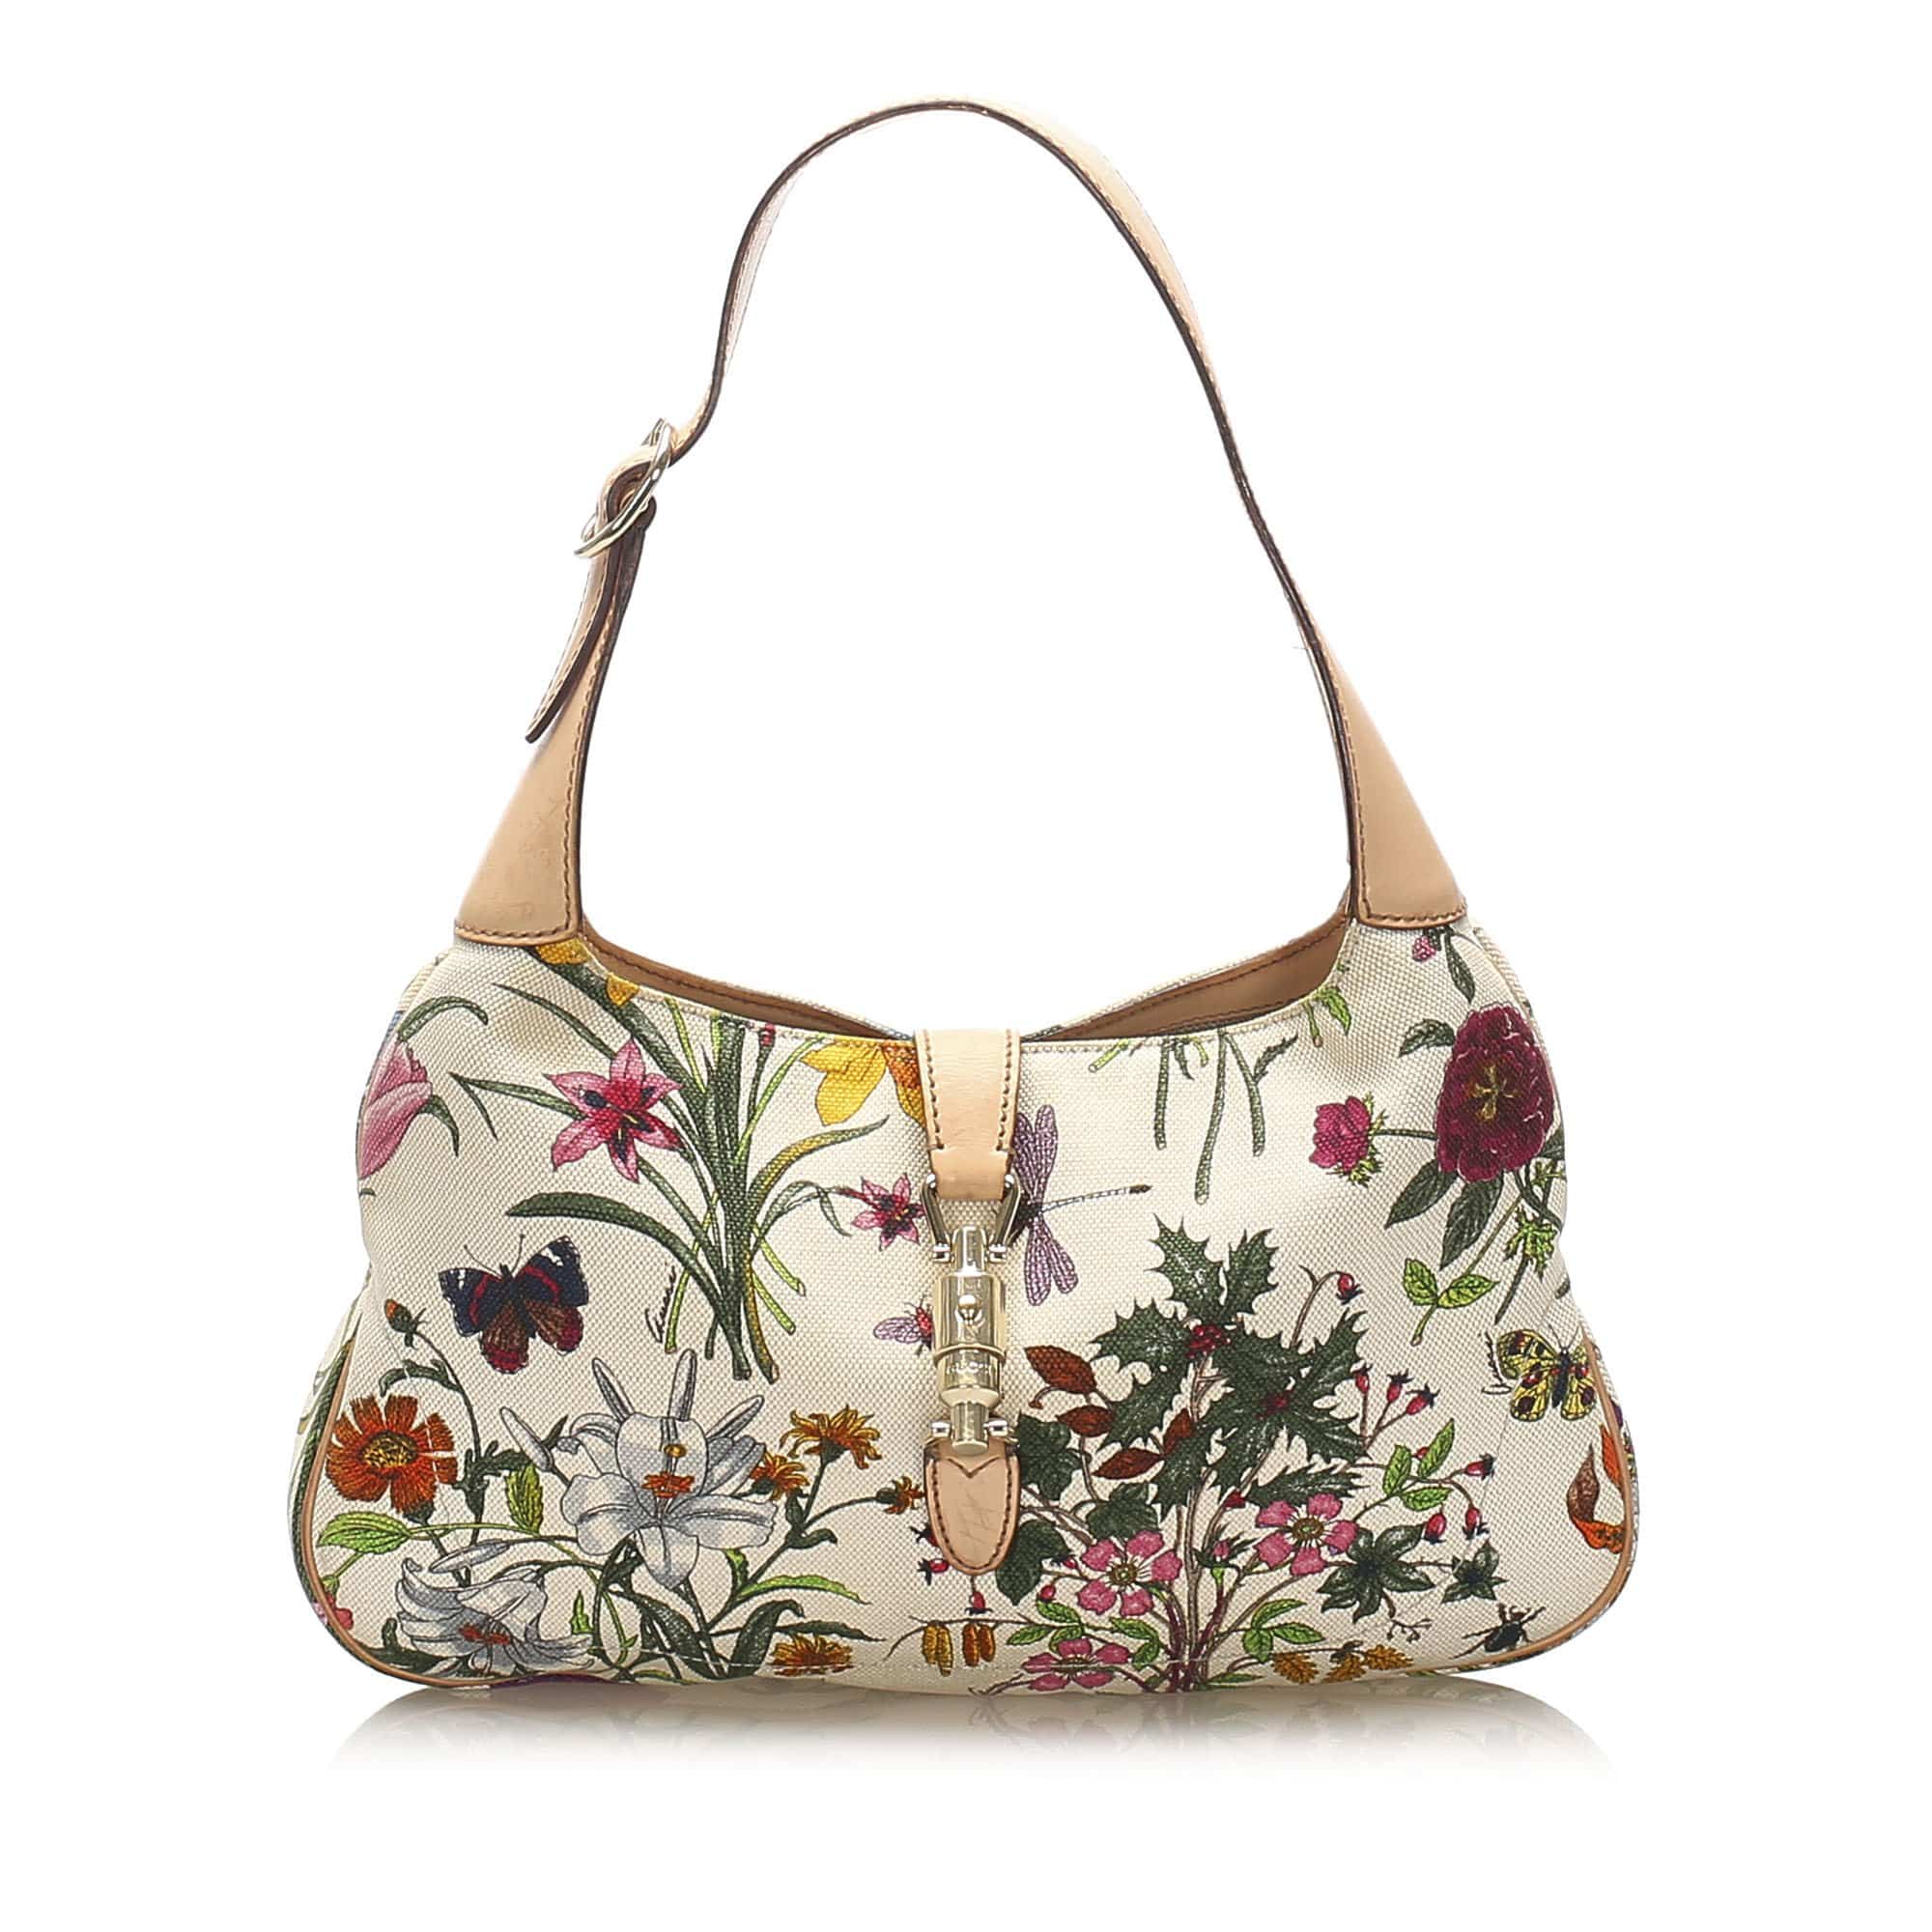 Gucci Guccissima Floral Jackie O Bag